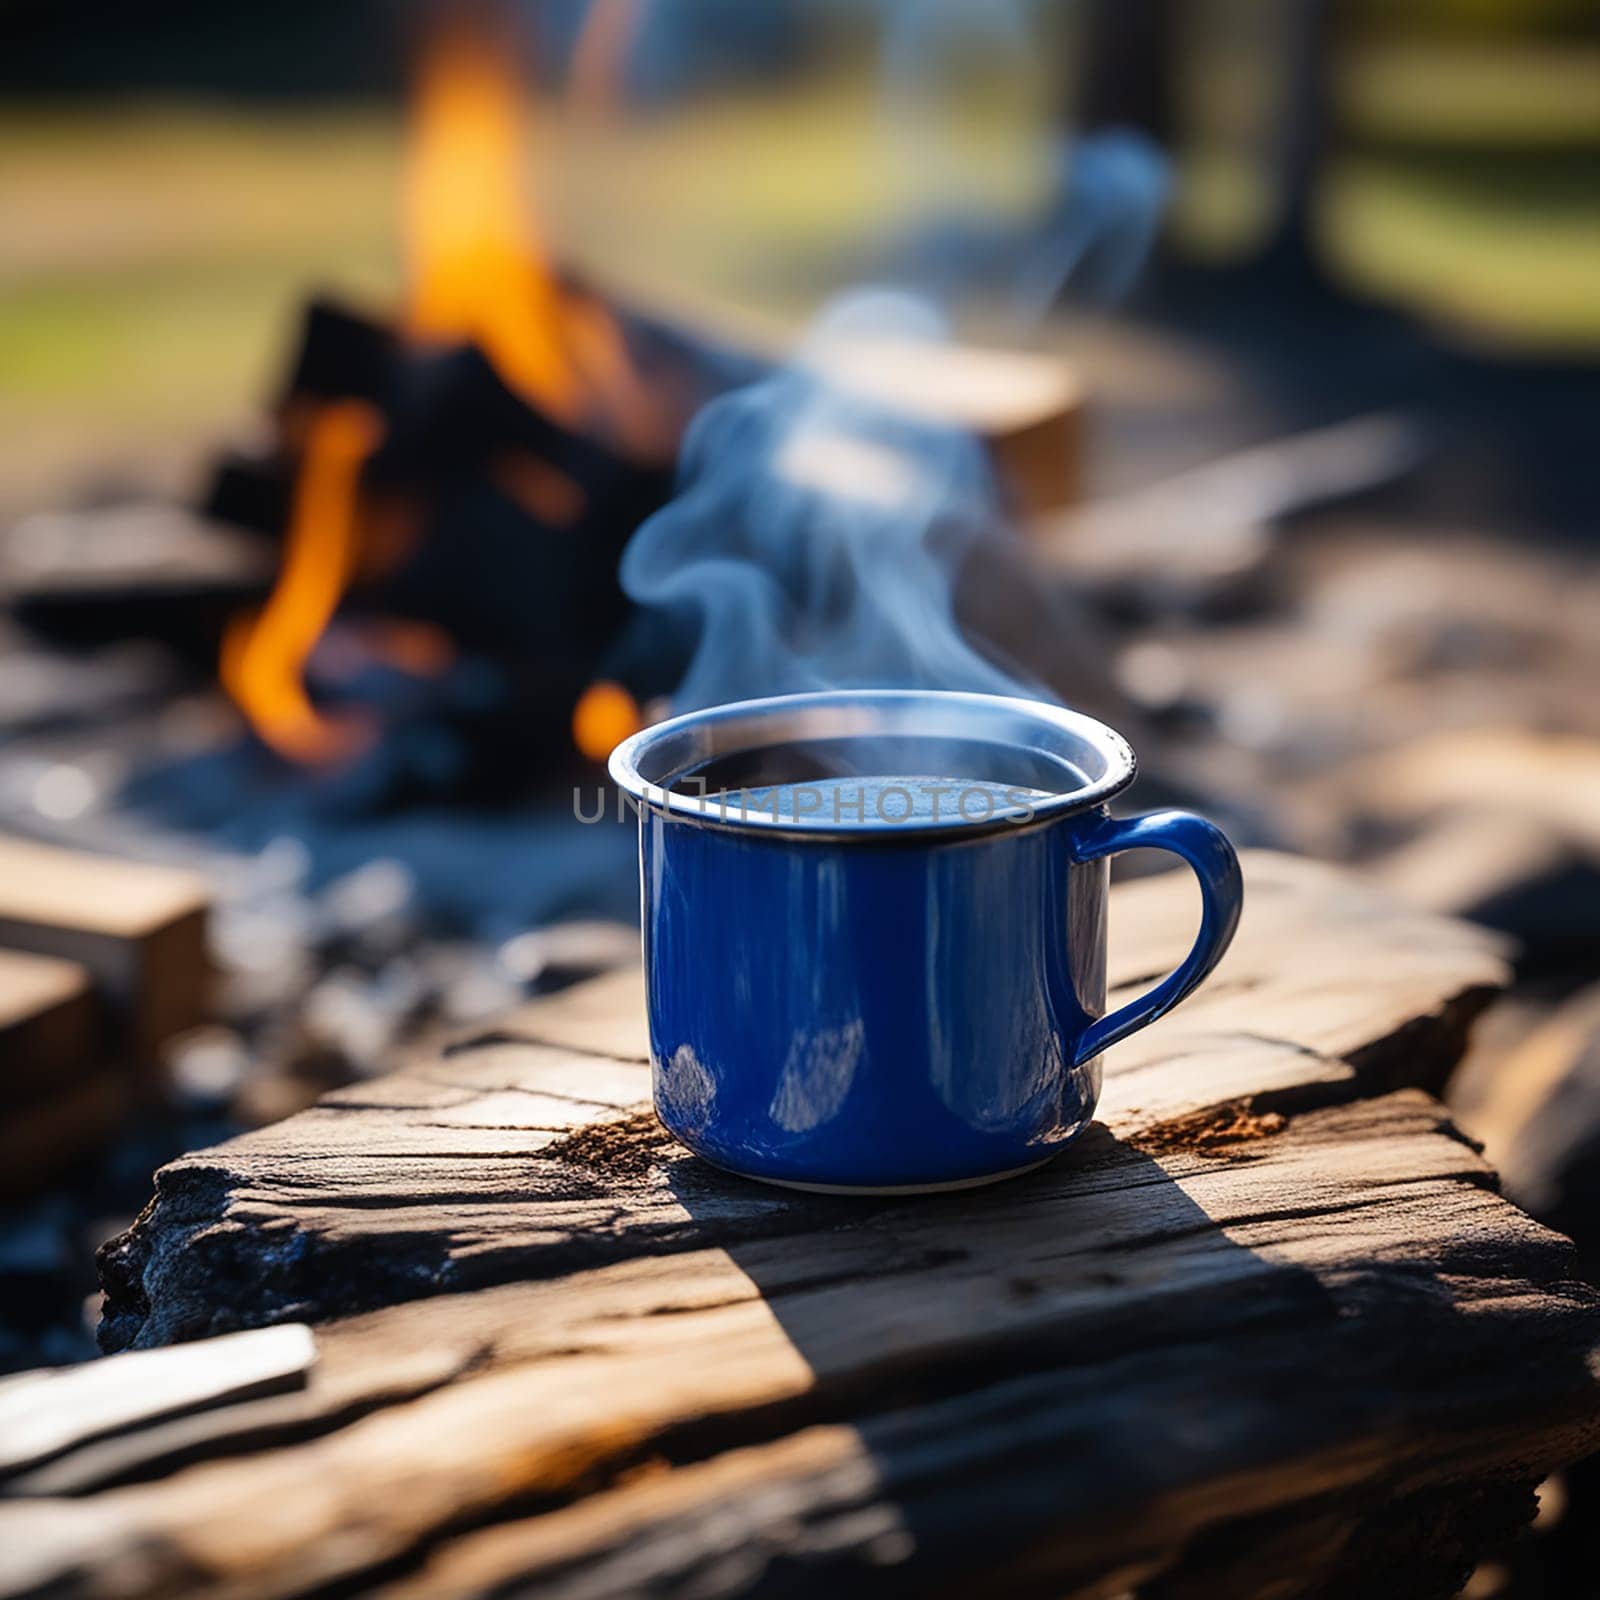 teaming Coffee in a Blue Enamel Cup by an Outdoor Fire